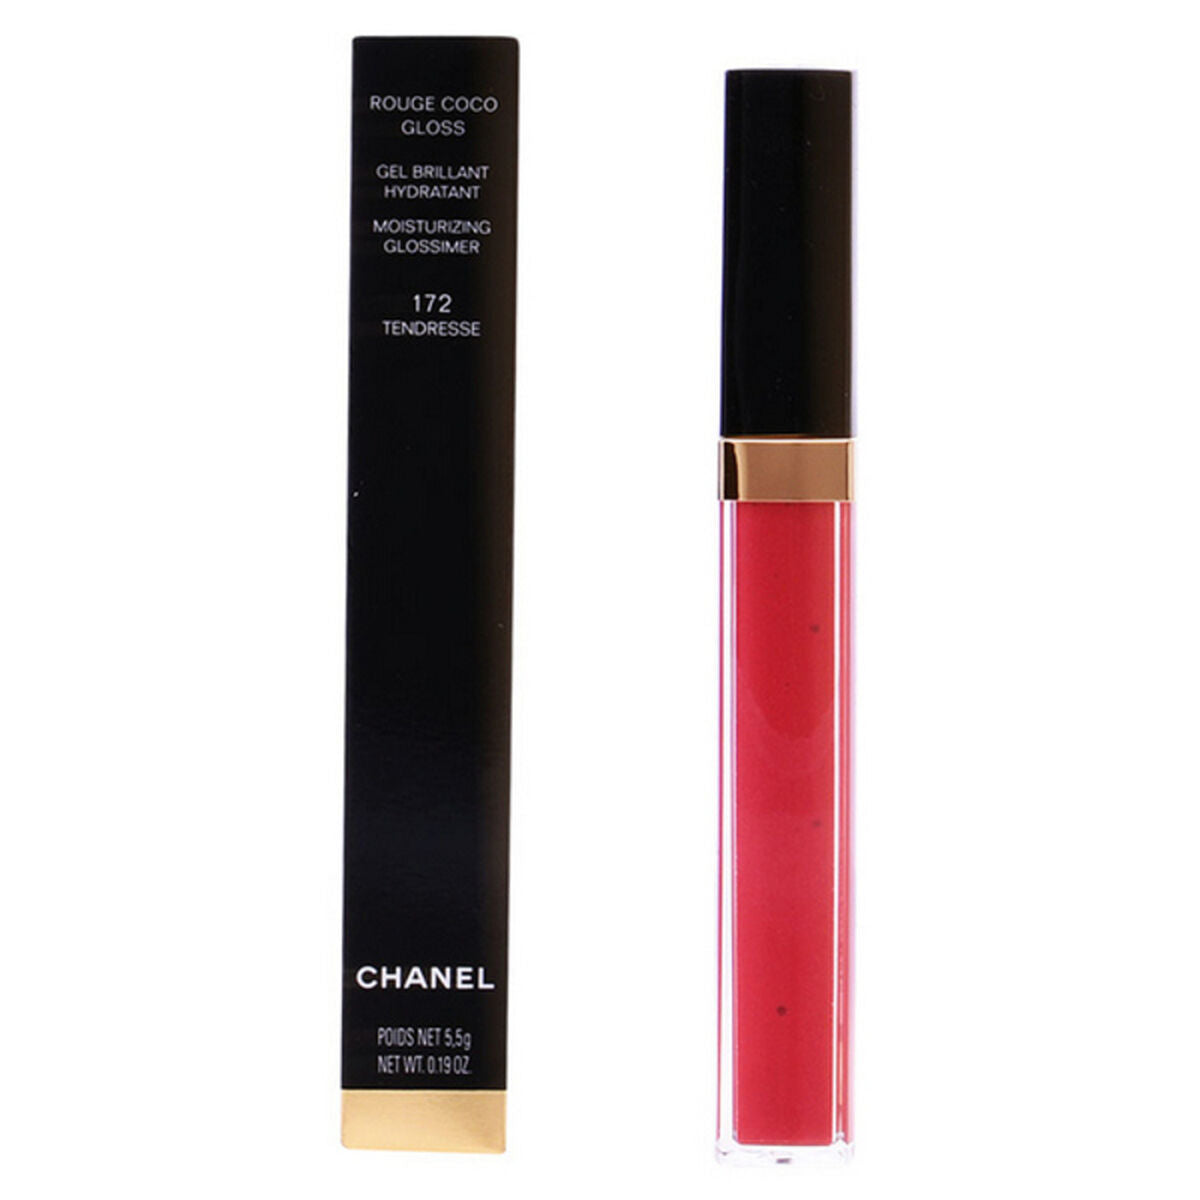 Lèvre gloss rouge coco chanel